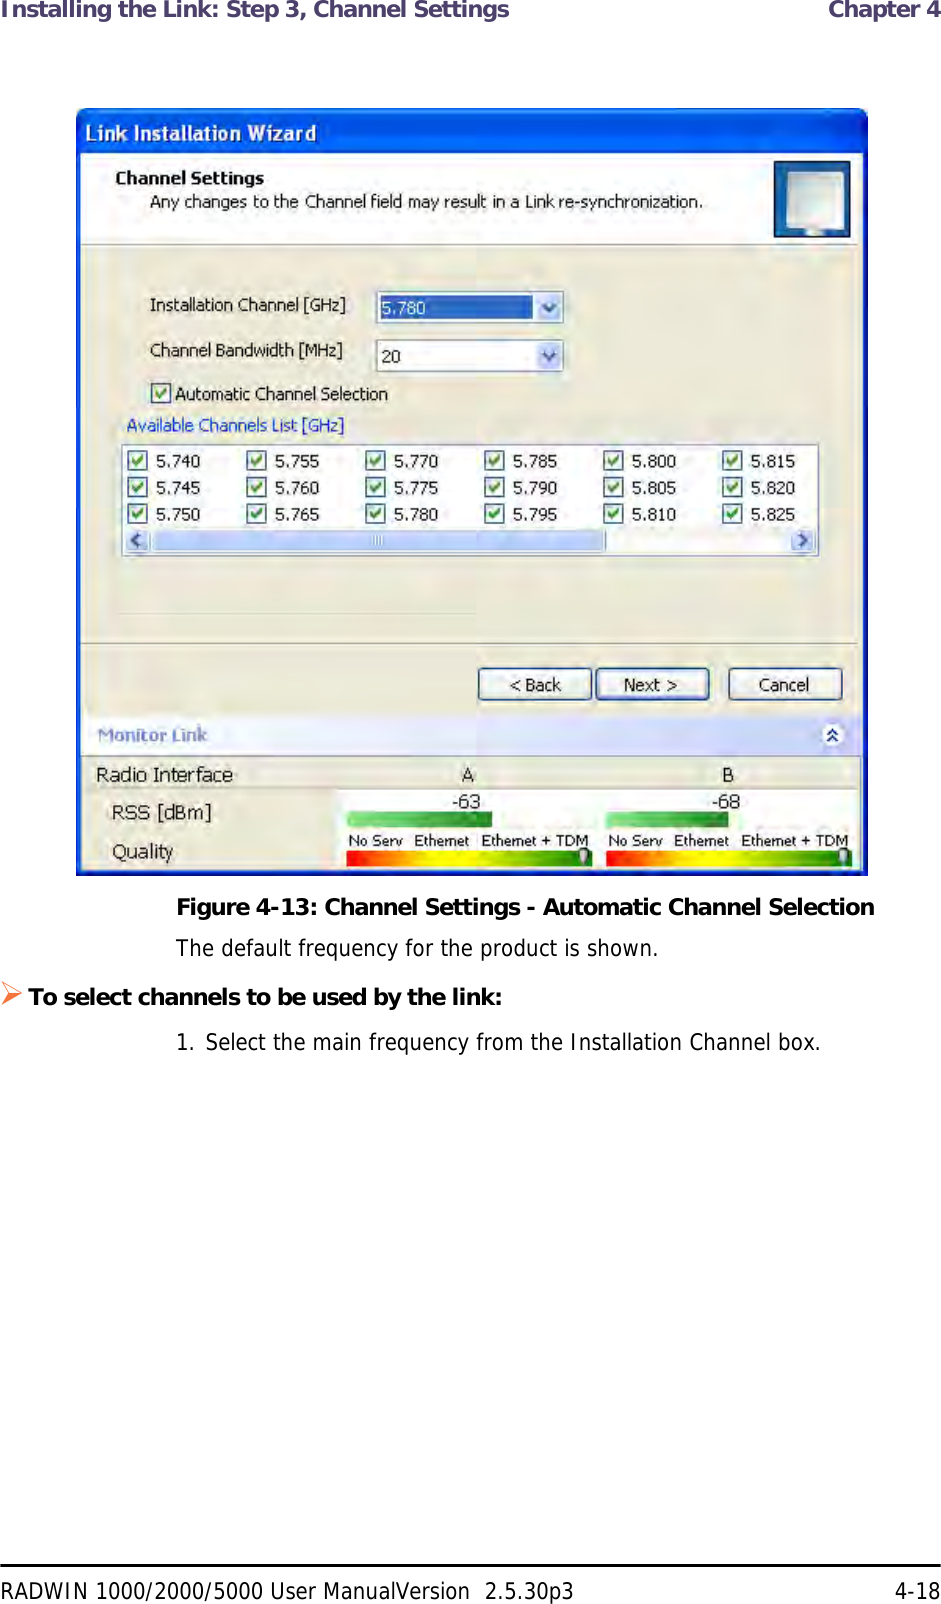 Installing the Link: Step 3, Channel Settings  Chapter 4RADWIN 1000/2000/5000 User ManualVersion  2.5.30p3 4-18Figure 4-13: Channel Settings - Automatic Channel SelectionThe default frequency for the product is shown.To select channels to be used by the link:1. Select the main frequency from the Installation Channel box.